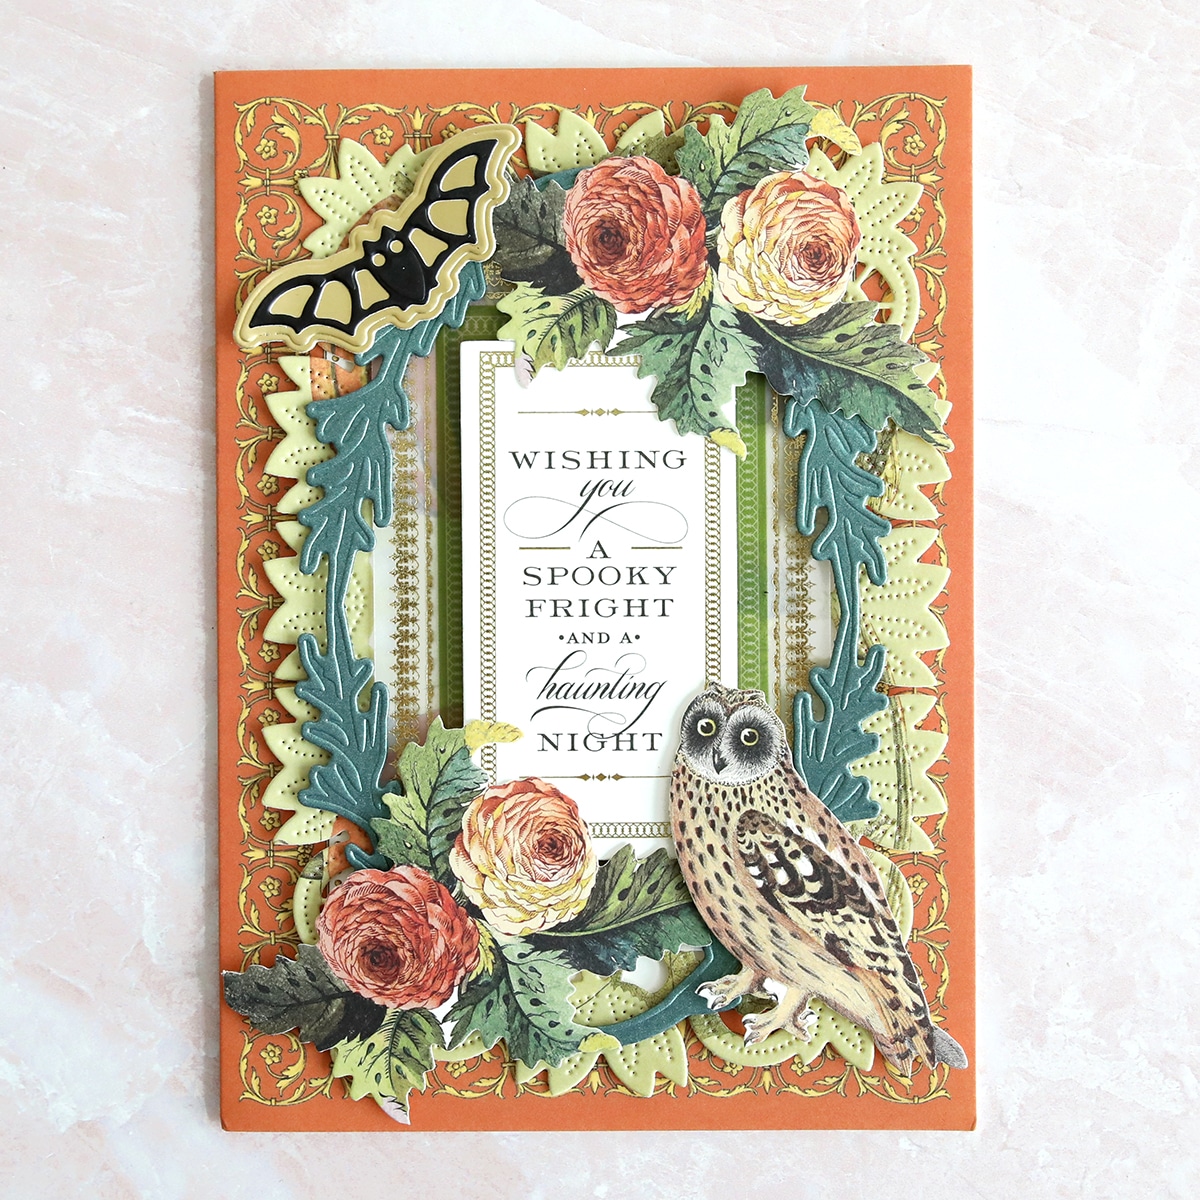 A card with an owl and flowers on it.